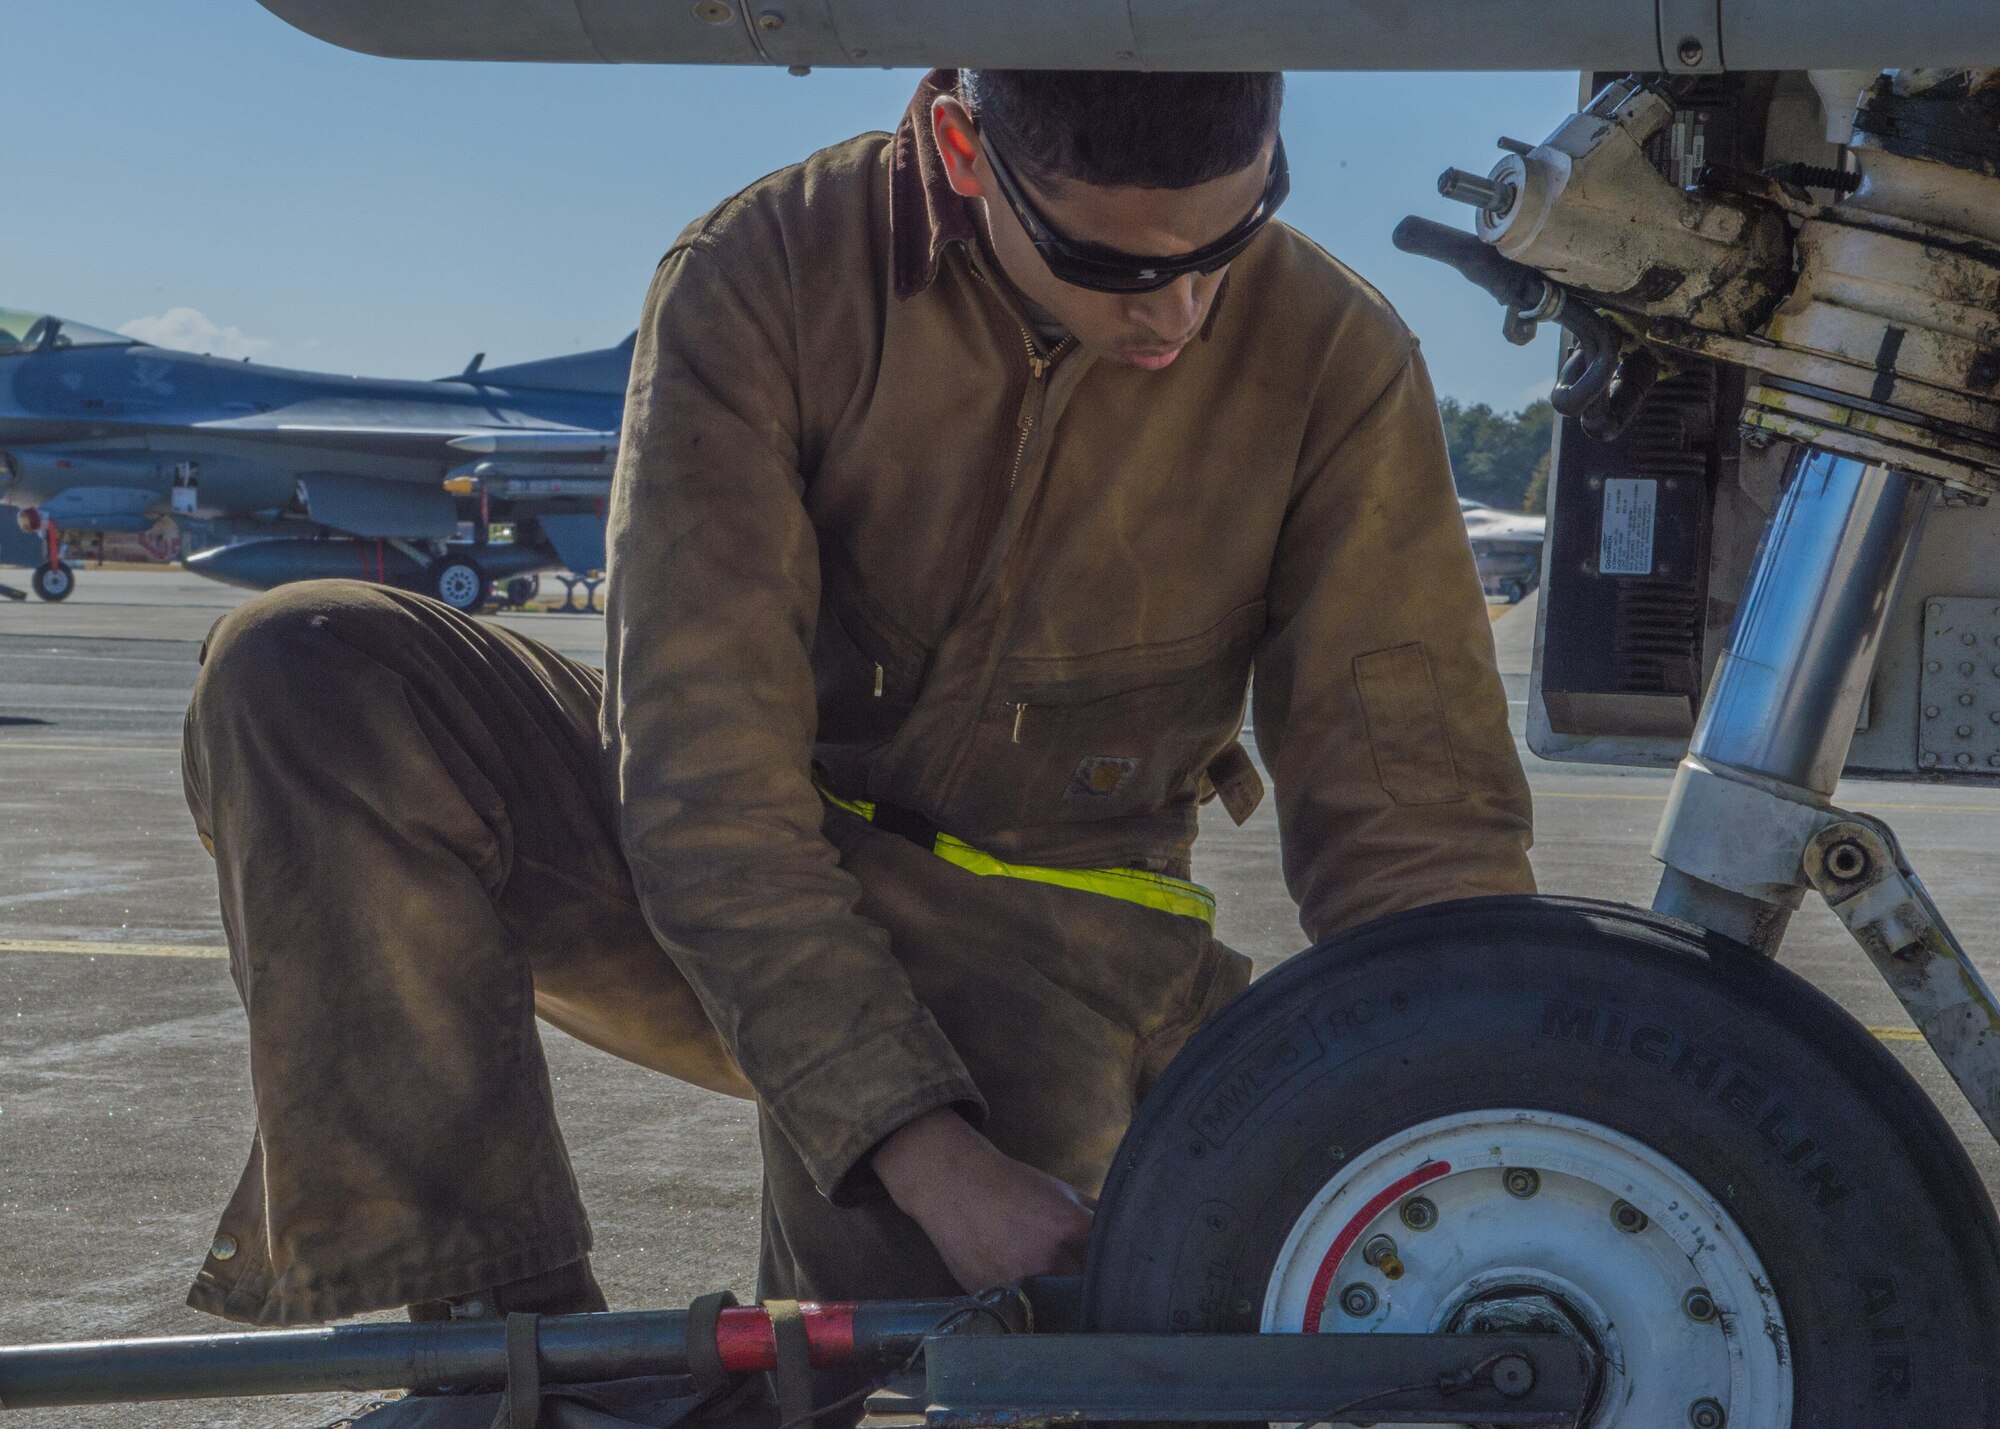 Senior Airman Kyle Lacy, a crew chief with the 35th Maintenance Squadron, performs a post-flight inspection on an F-16 Fighting Falcon during a surge exercise at Misawa Air Base, Japan, April 5, 2016. After aircraft land and return to their assigned crew chief, a post-flight inspection is conducted to ensure the aircraft didn’t accrue damage. During the two-day operation, the amount of time allotted for these inspections is decreased which heightens the tempo and simulates a combat environment. (U.S. Air Force photo/Airman 1st Class Jordyn Fetter)